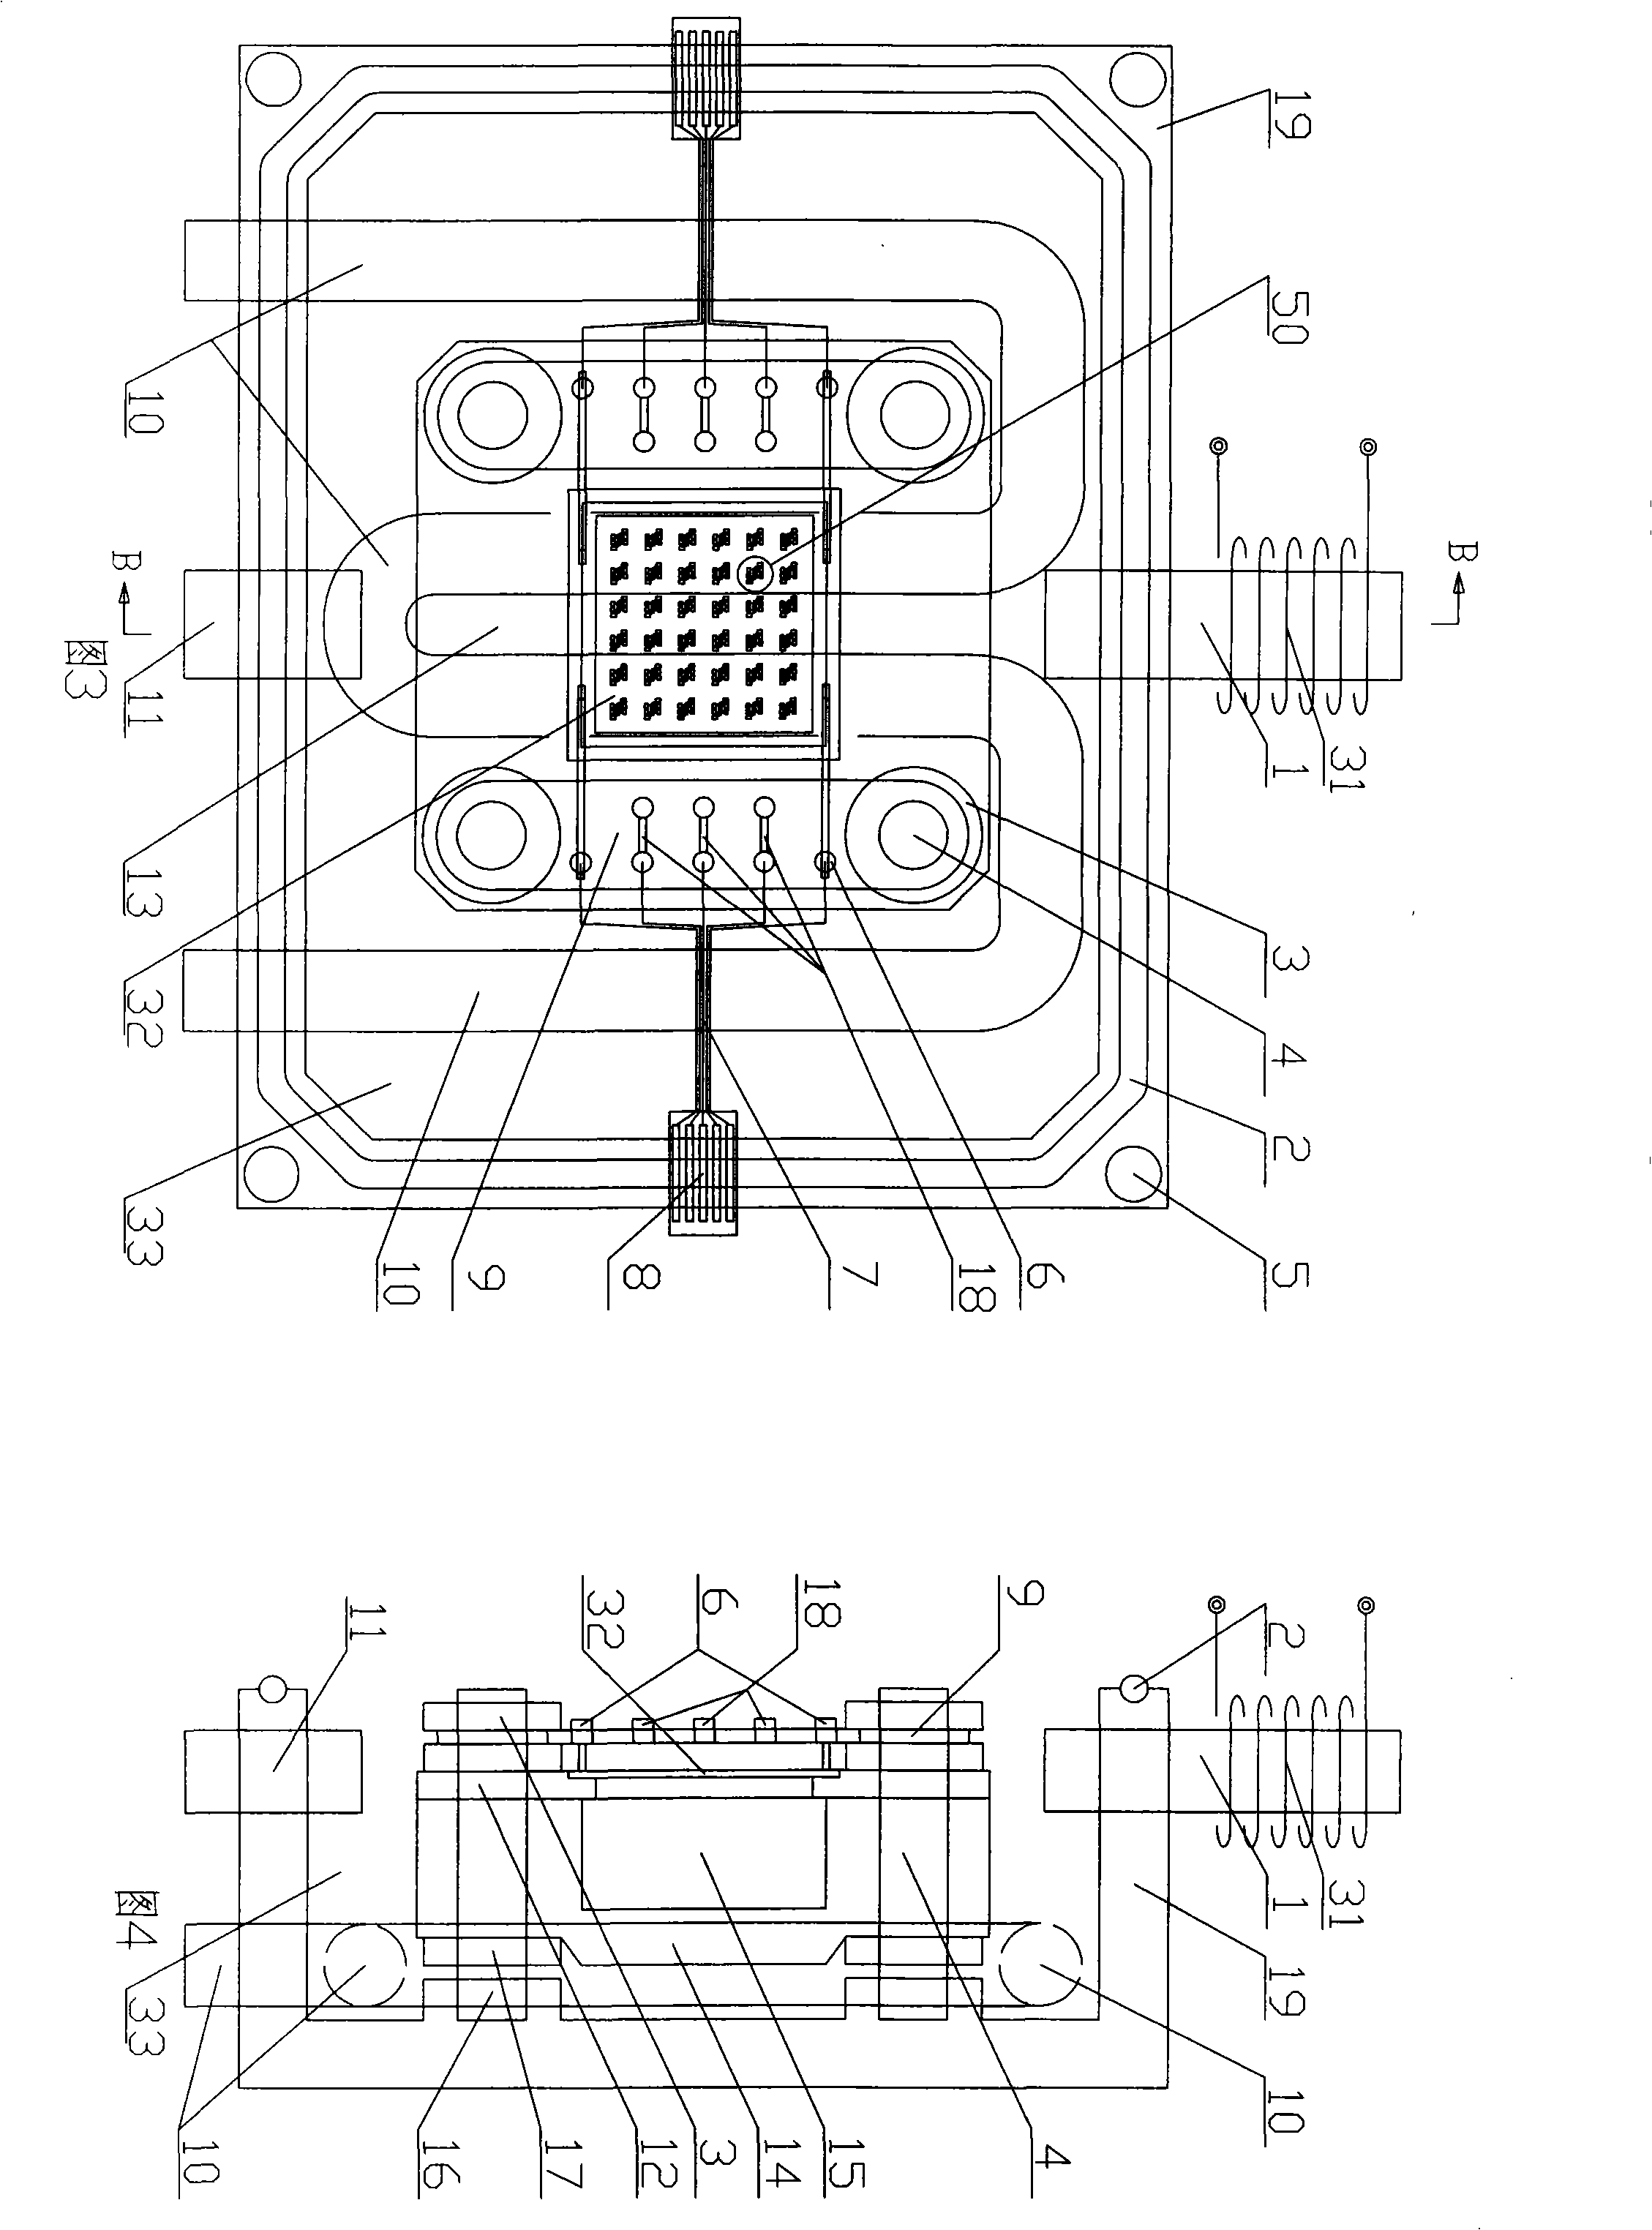 Heating device for micro-area controllable nano functional material synthesis